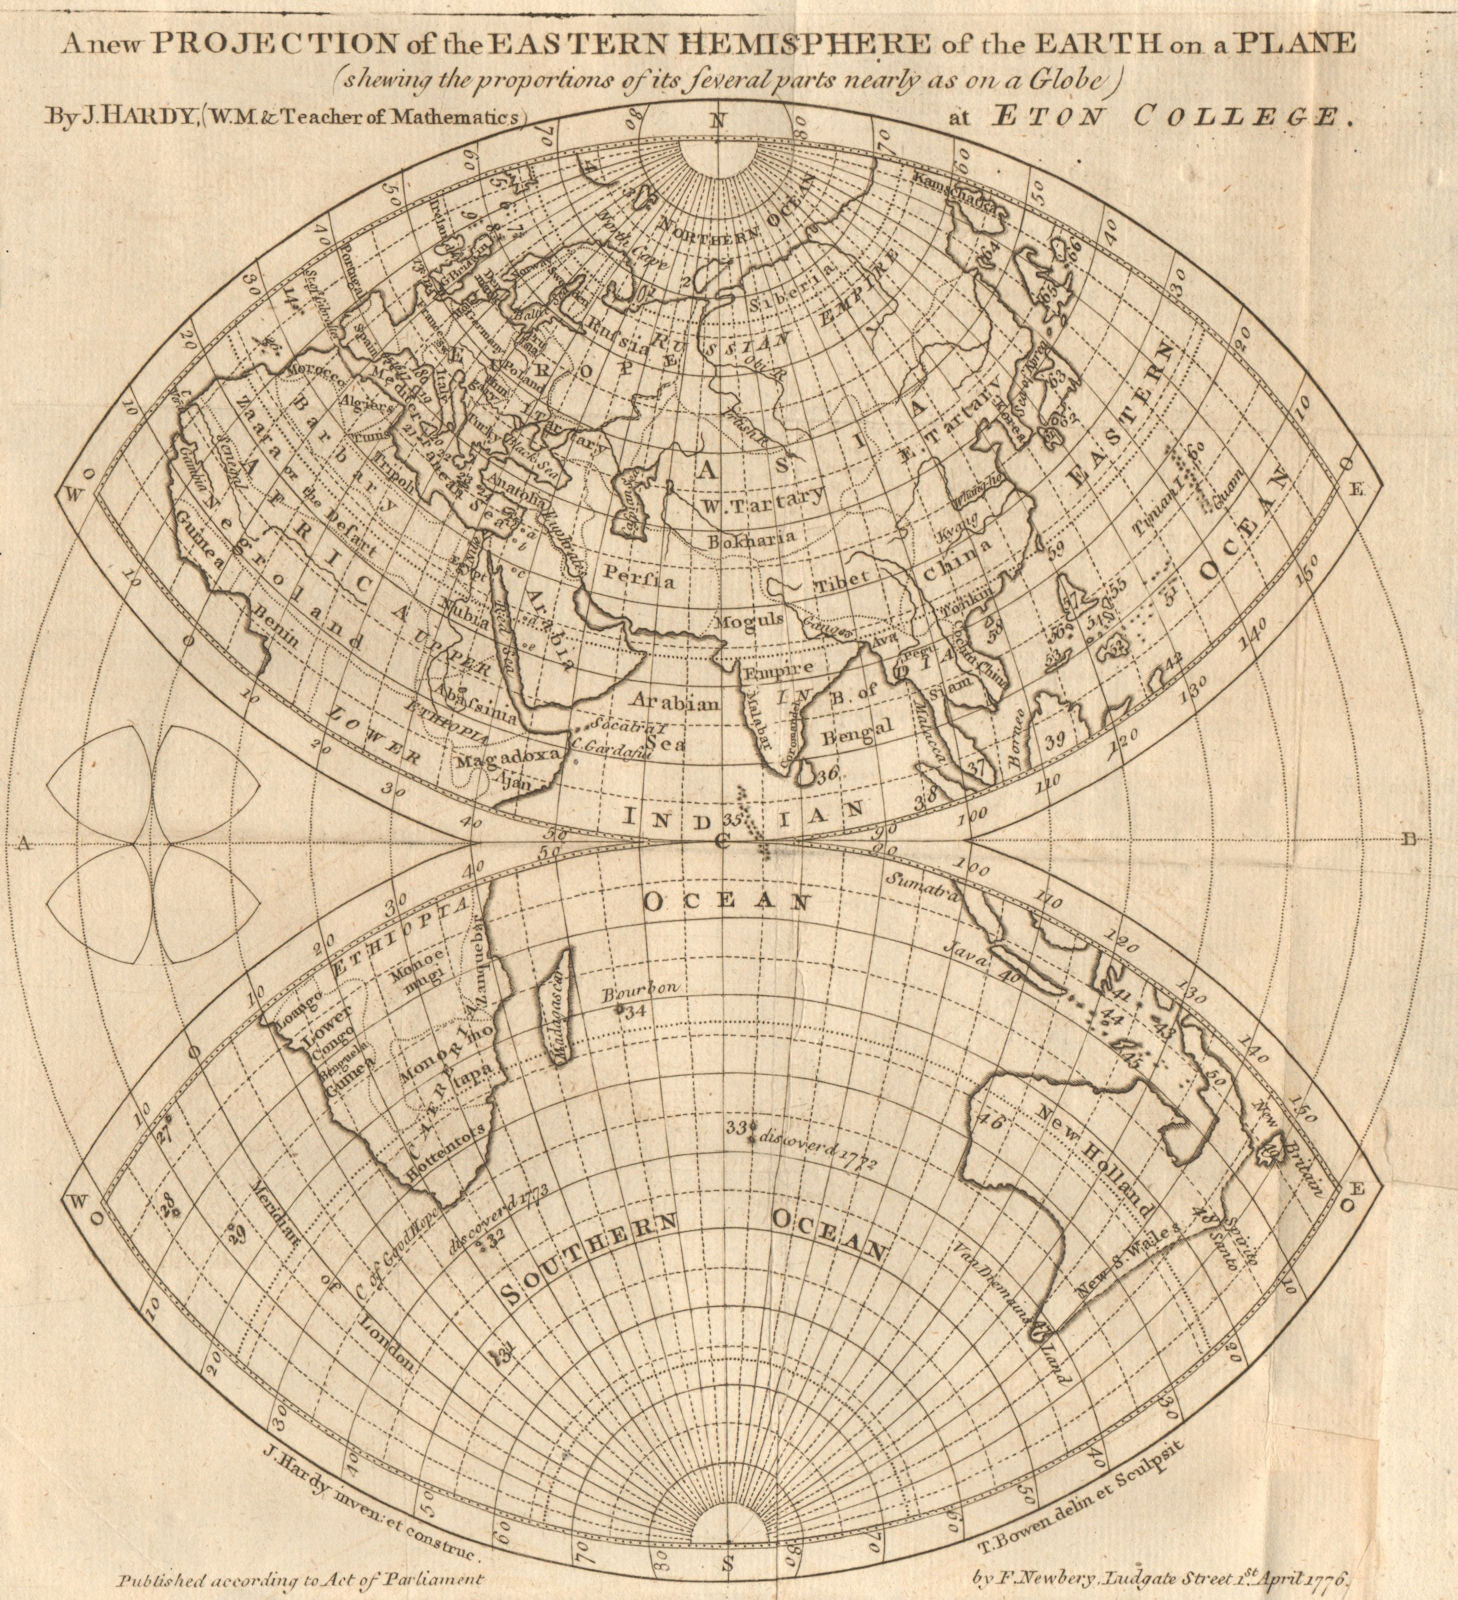 New projection of the Eastern Hemisphere of the Earth on a plane. BOWEN 1776 map